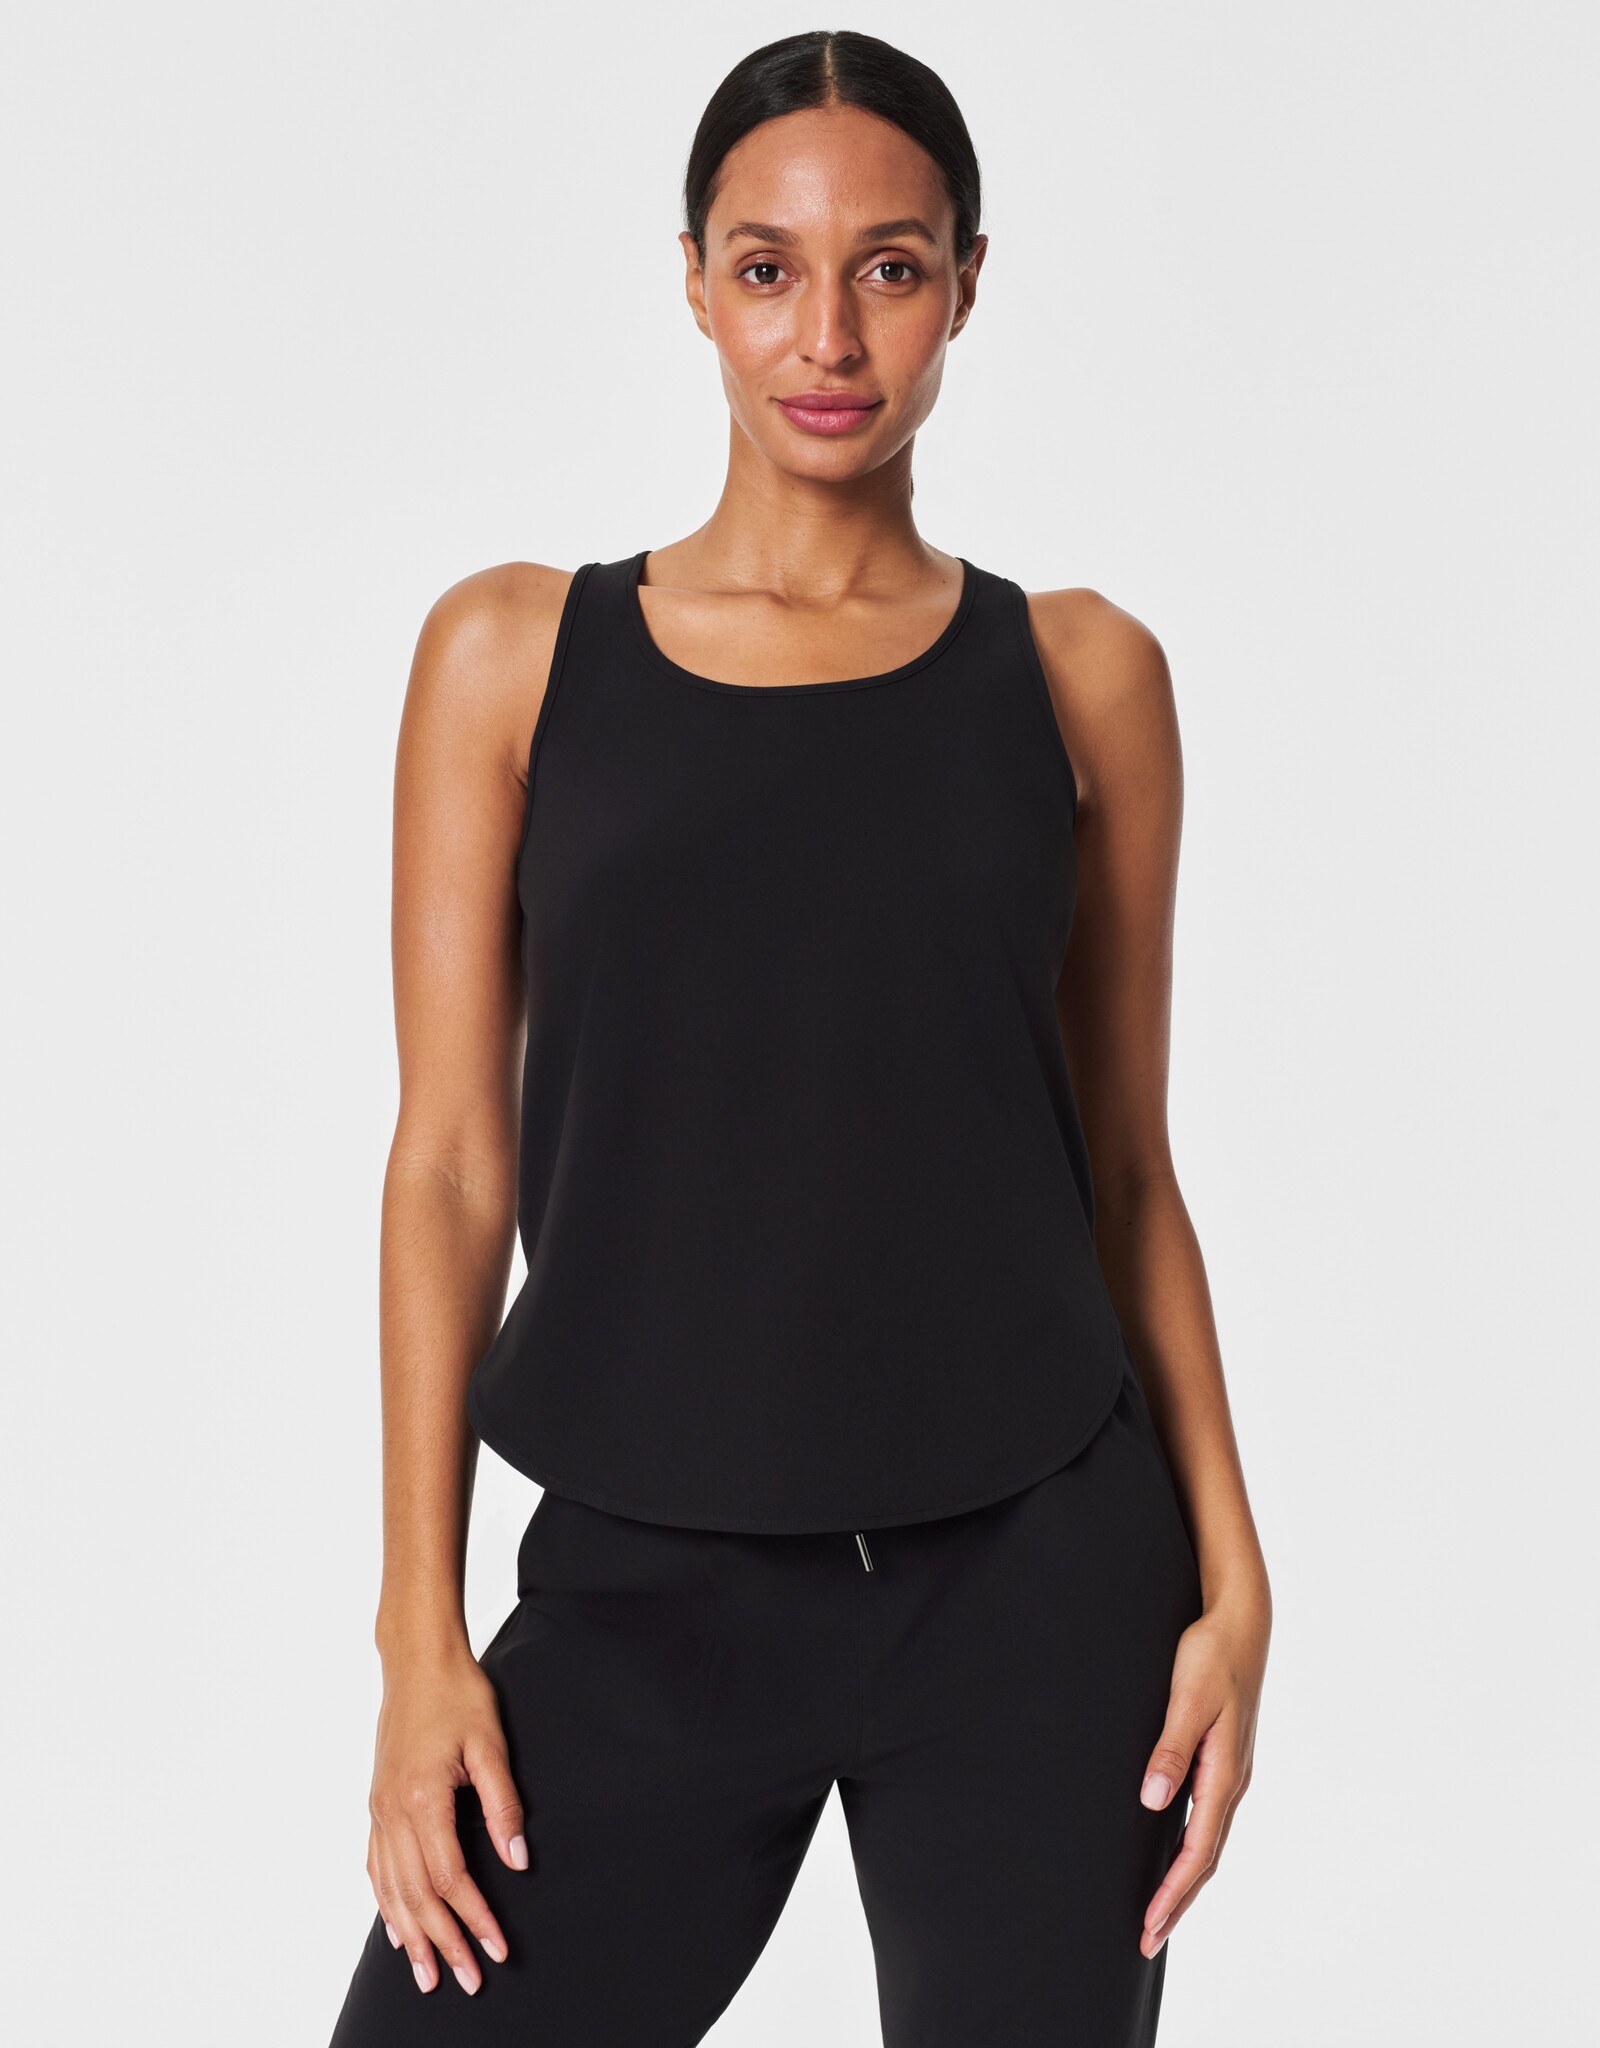 Spanx Spanx Out of Office Shell Tank Black